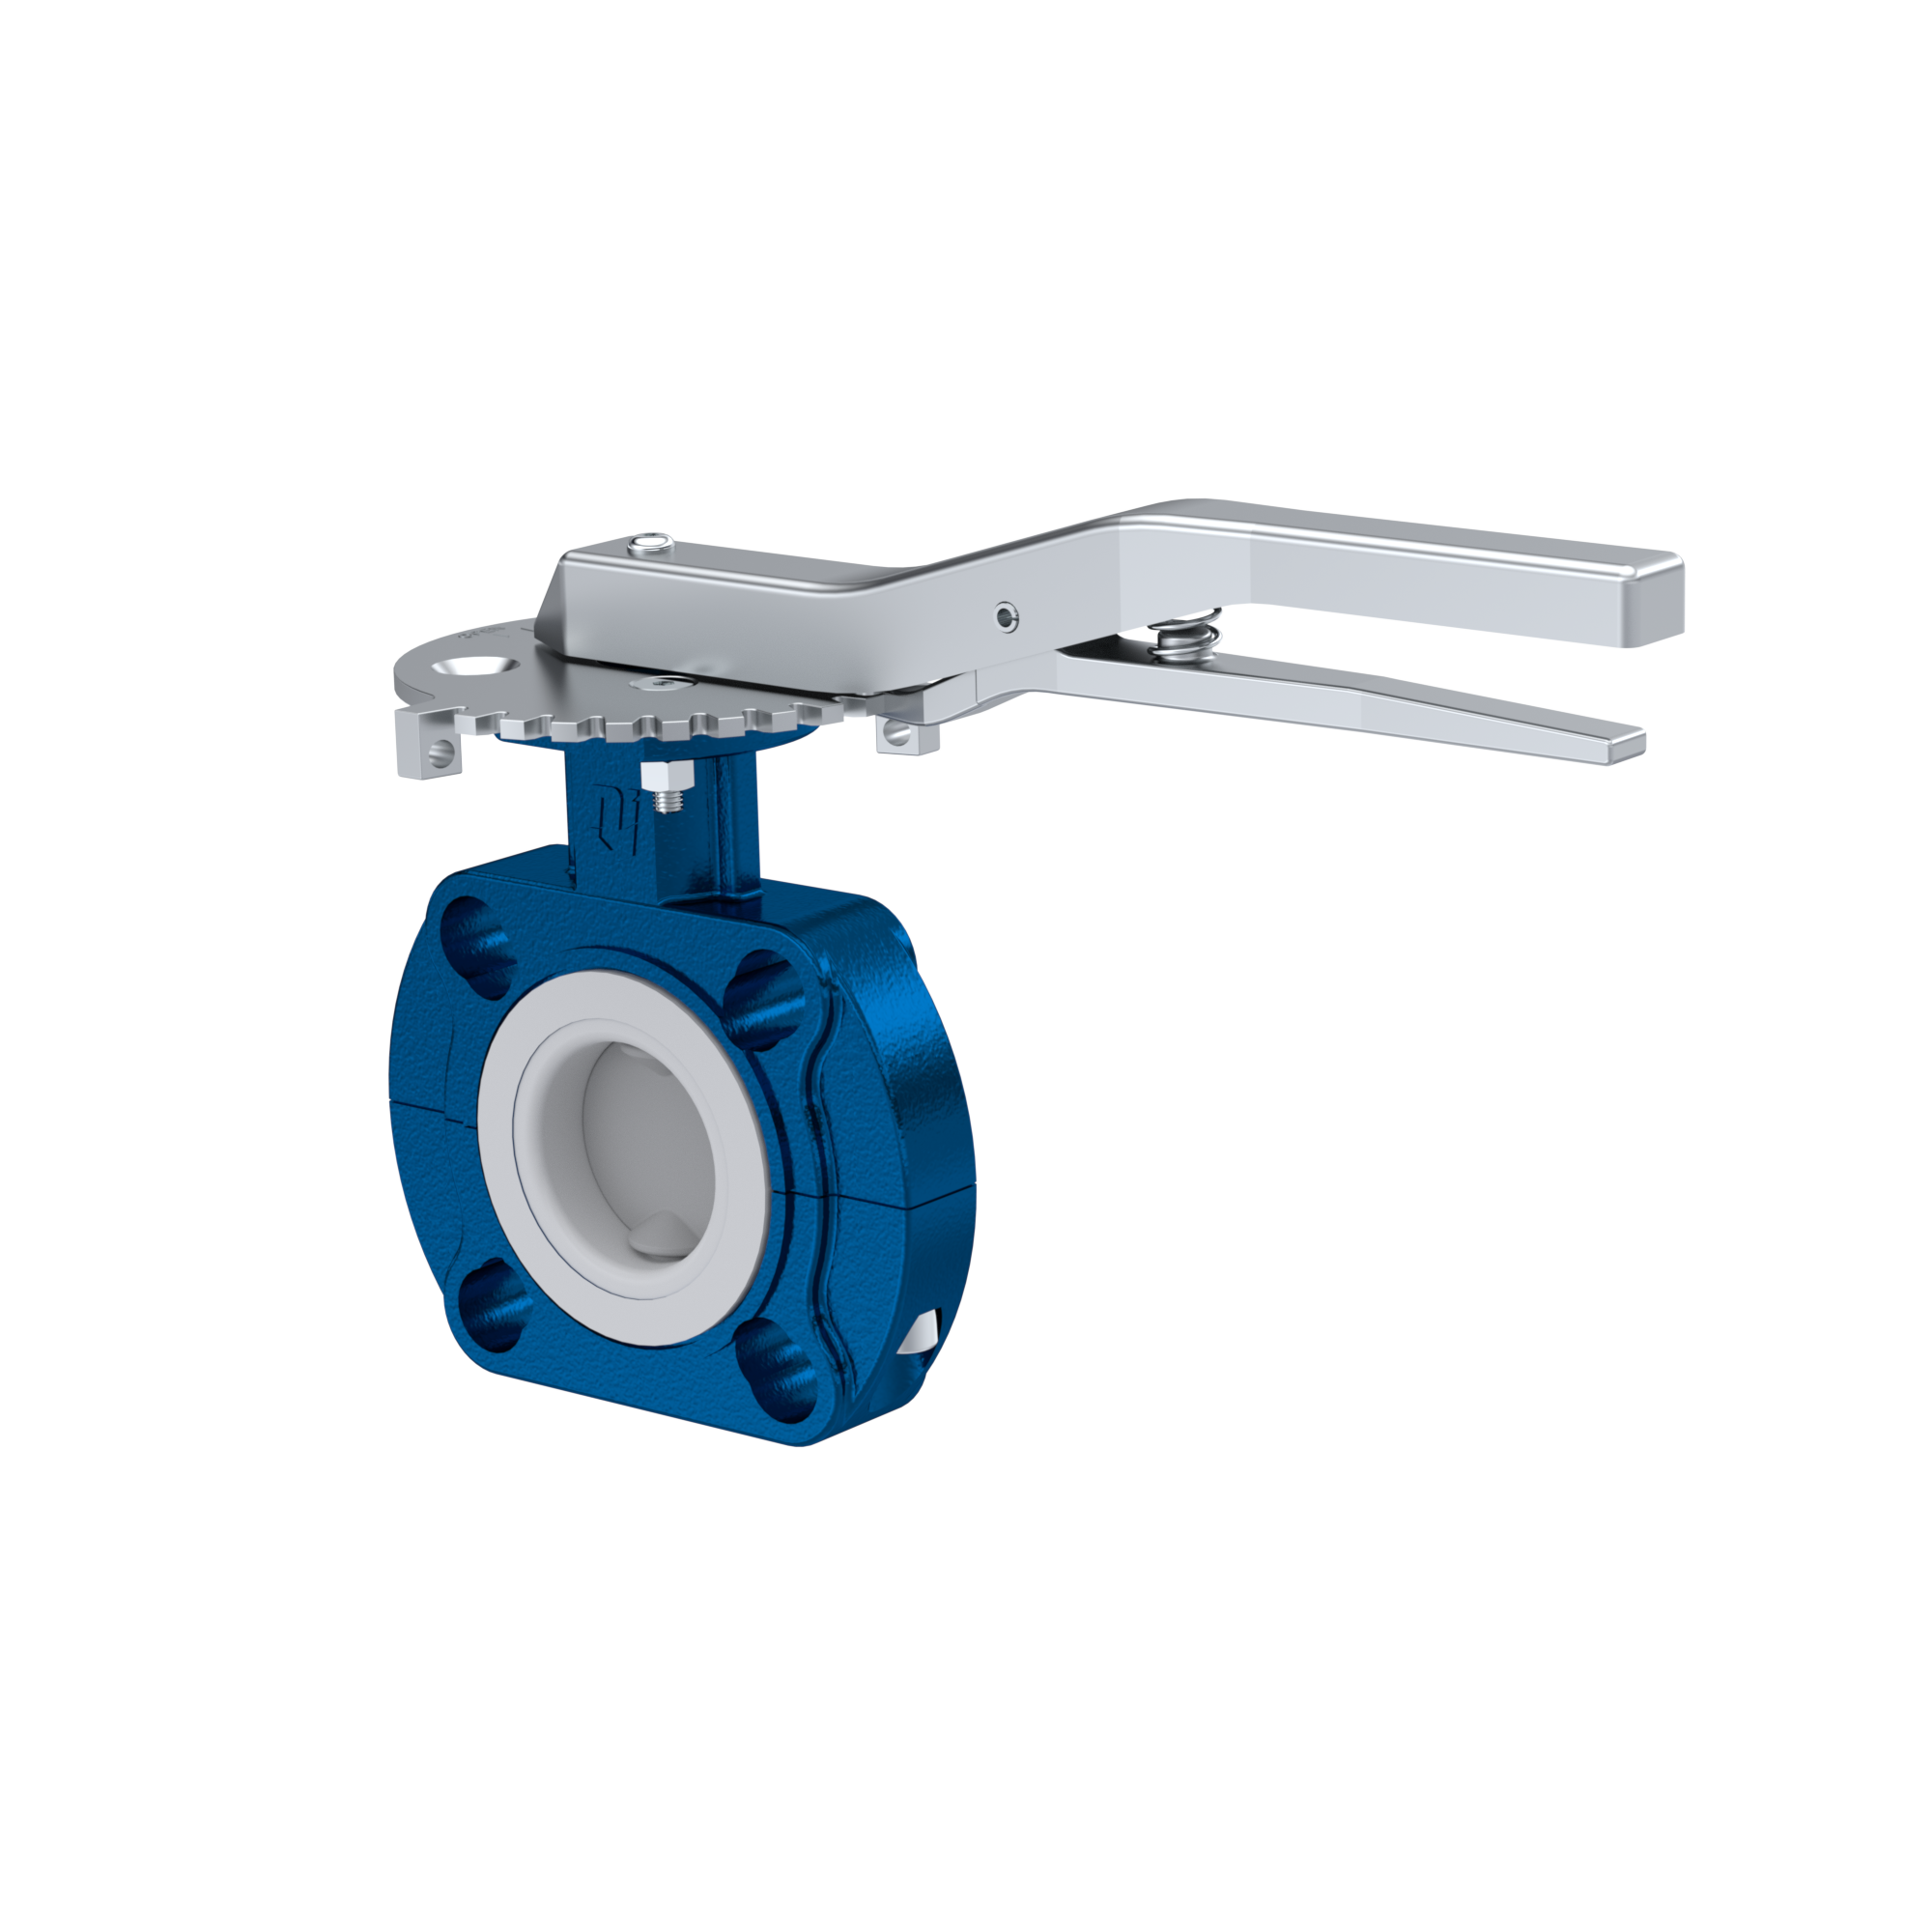 Butterfly-valve PTFE AK09 DN40 PN10-PN16 lever silicone insert